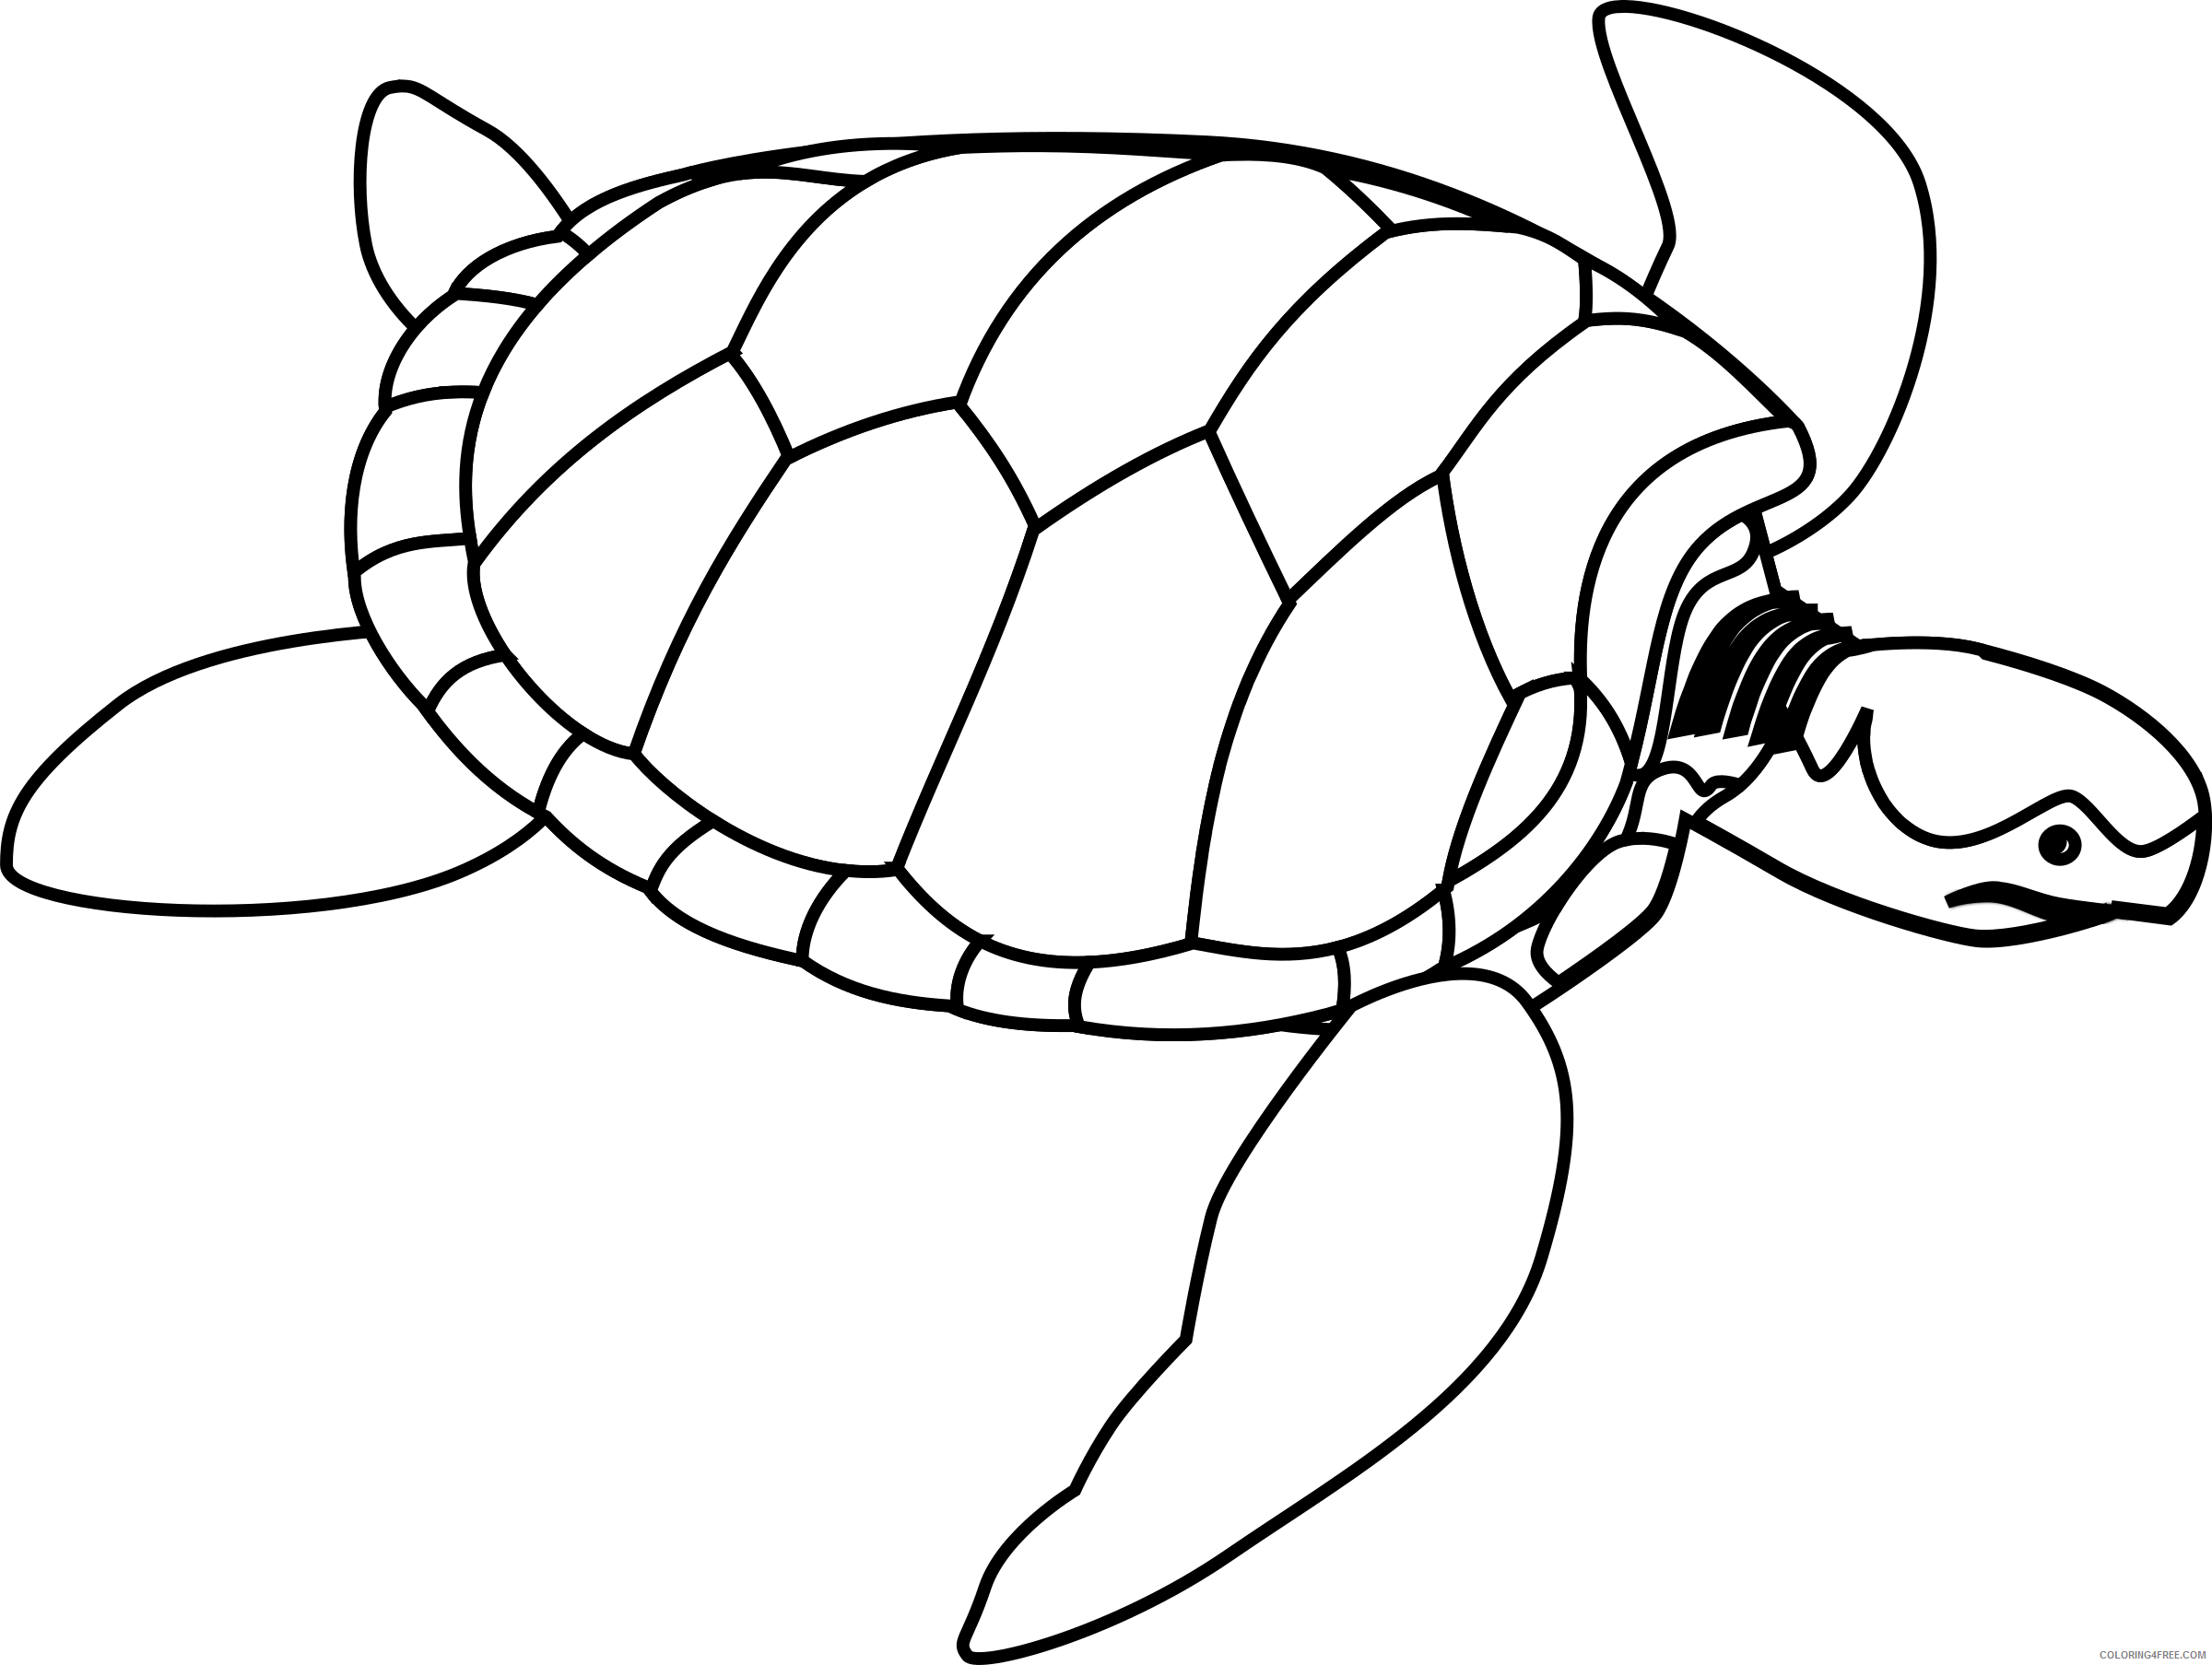 Turtle Outline Coloring Pages turtle line art valessiobrito green Printable Coloring4free